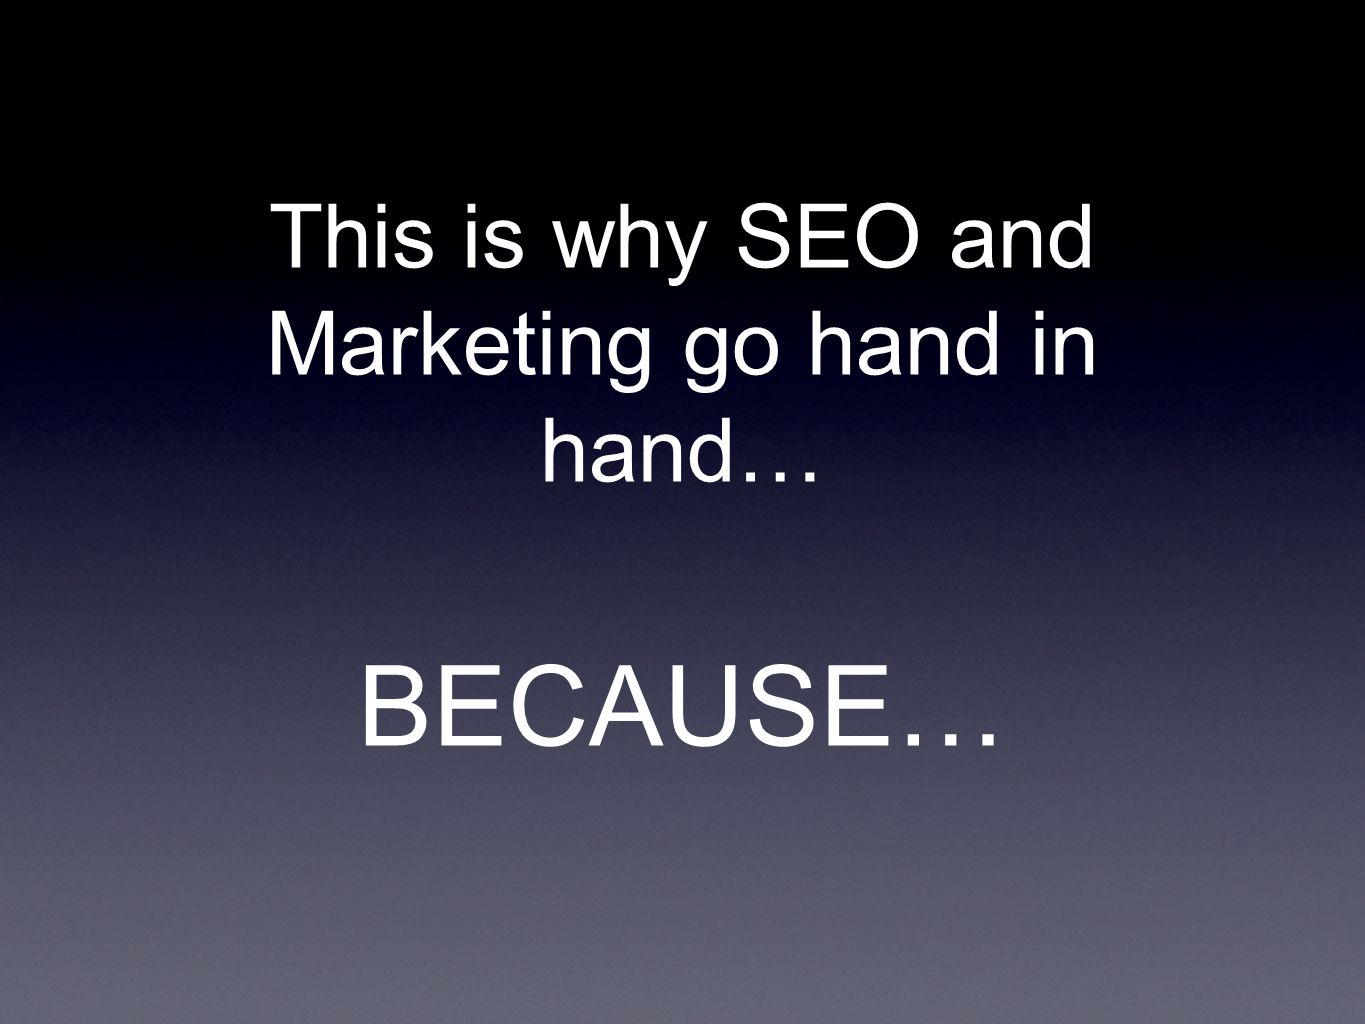 This is why SEO and Marketing go hand in hand… BECAUSE…